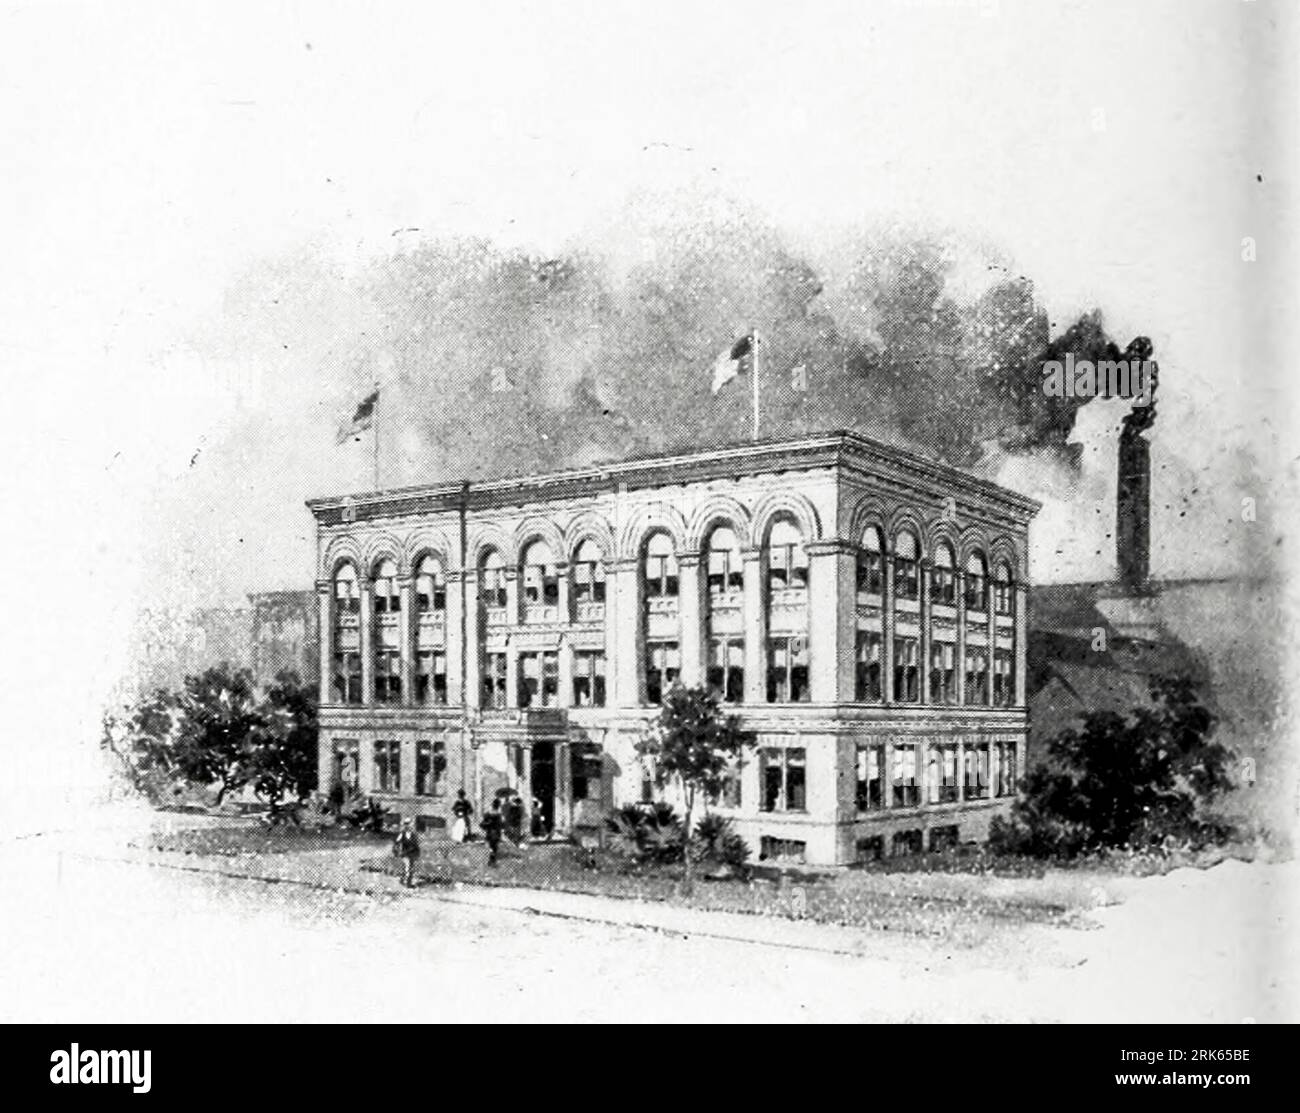 Columbia Cycle Factory HARTFORD, Connecticut multi-floored office building from the Article MODERN MACHINE-SHOP ECONOMICS PRIME REQUISITES OF SHOP CONSTRUCTION By Horace L. Arnold from The Engineering Magazine DEVOTED TO INDUSTRIAL PROGRESS Volume XI October 1896 NEW YORK The Engineering Magazine Co Stock Photo